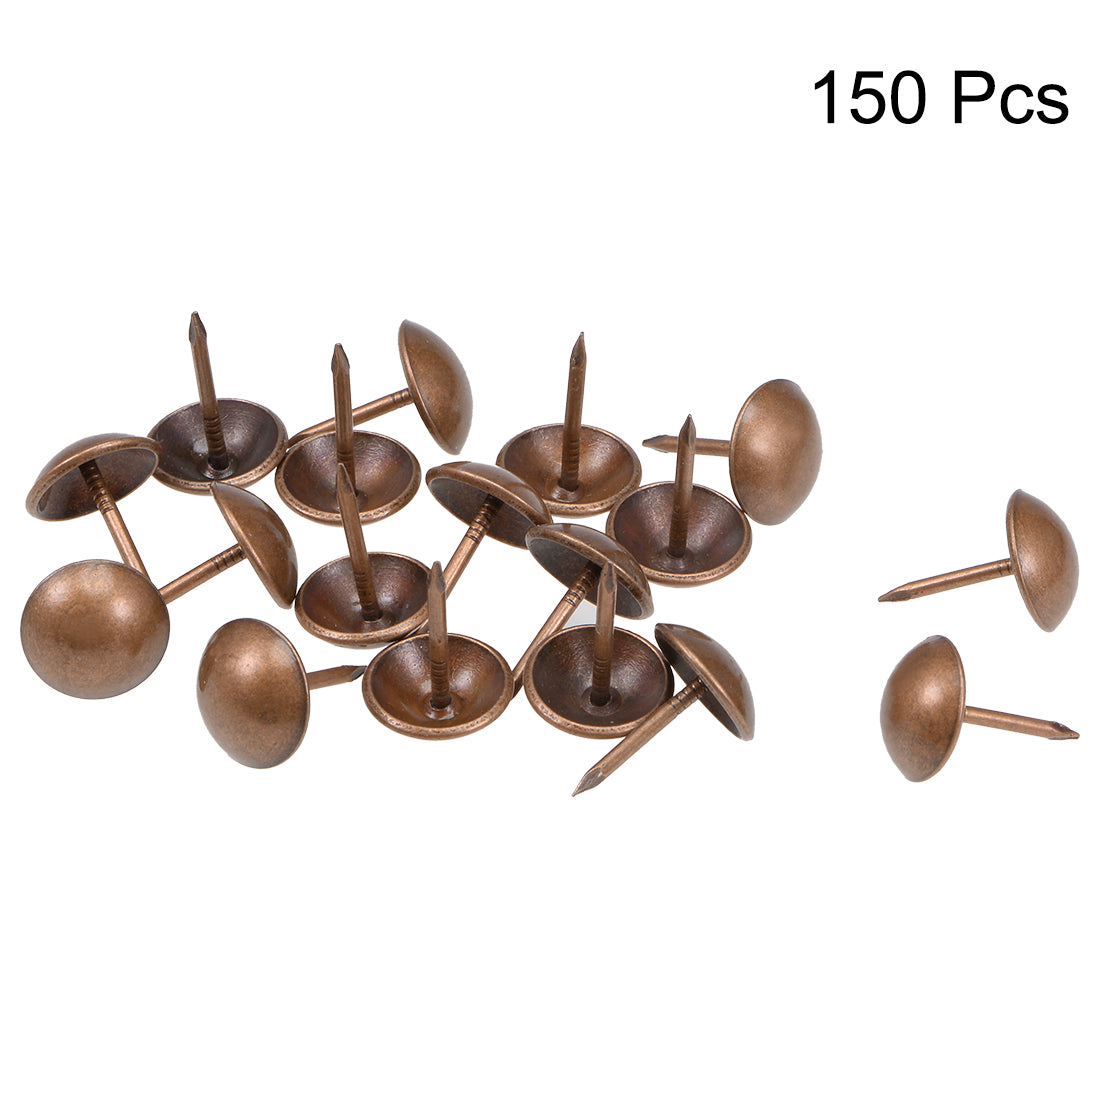 uxcell Uxcell Upholstery Nails Tacks 12mm Head Dia Antique Round Thumb Push Pins Copper Tone 150 Pcs